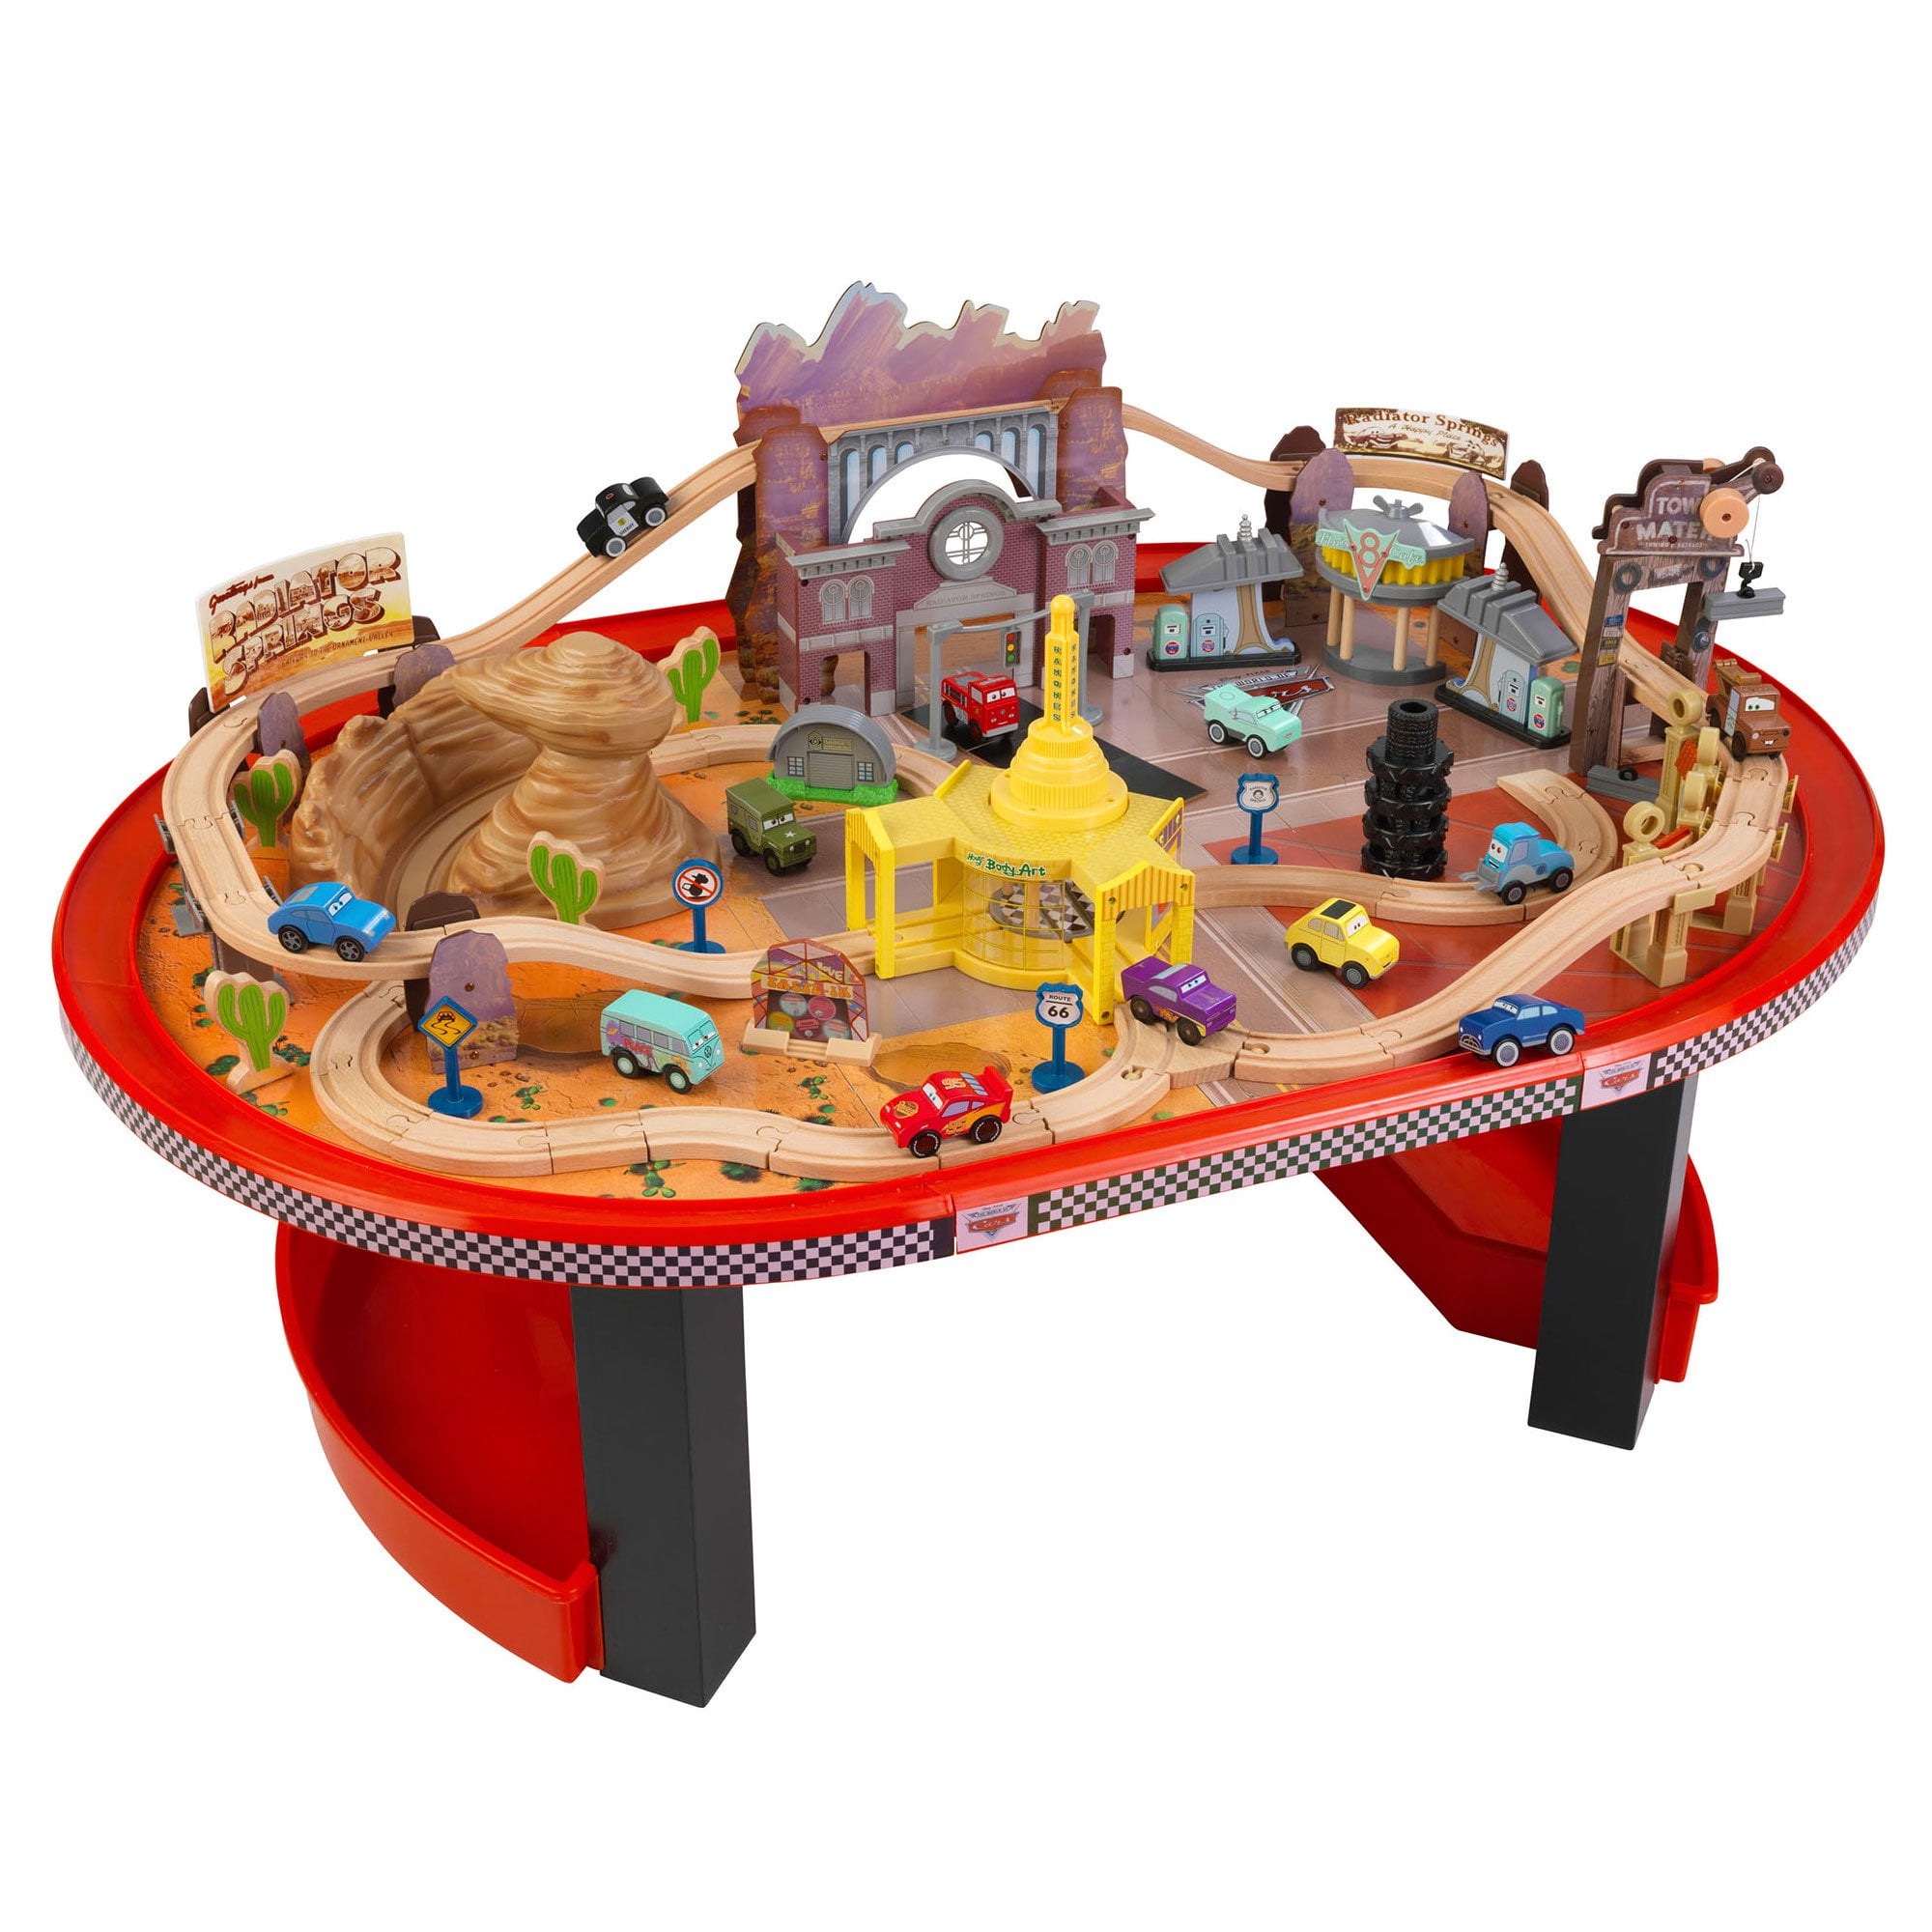 Replacement Characters KidKraft Disney Cars Radiator Springs Table YOUR CHOICE 